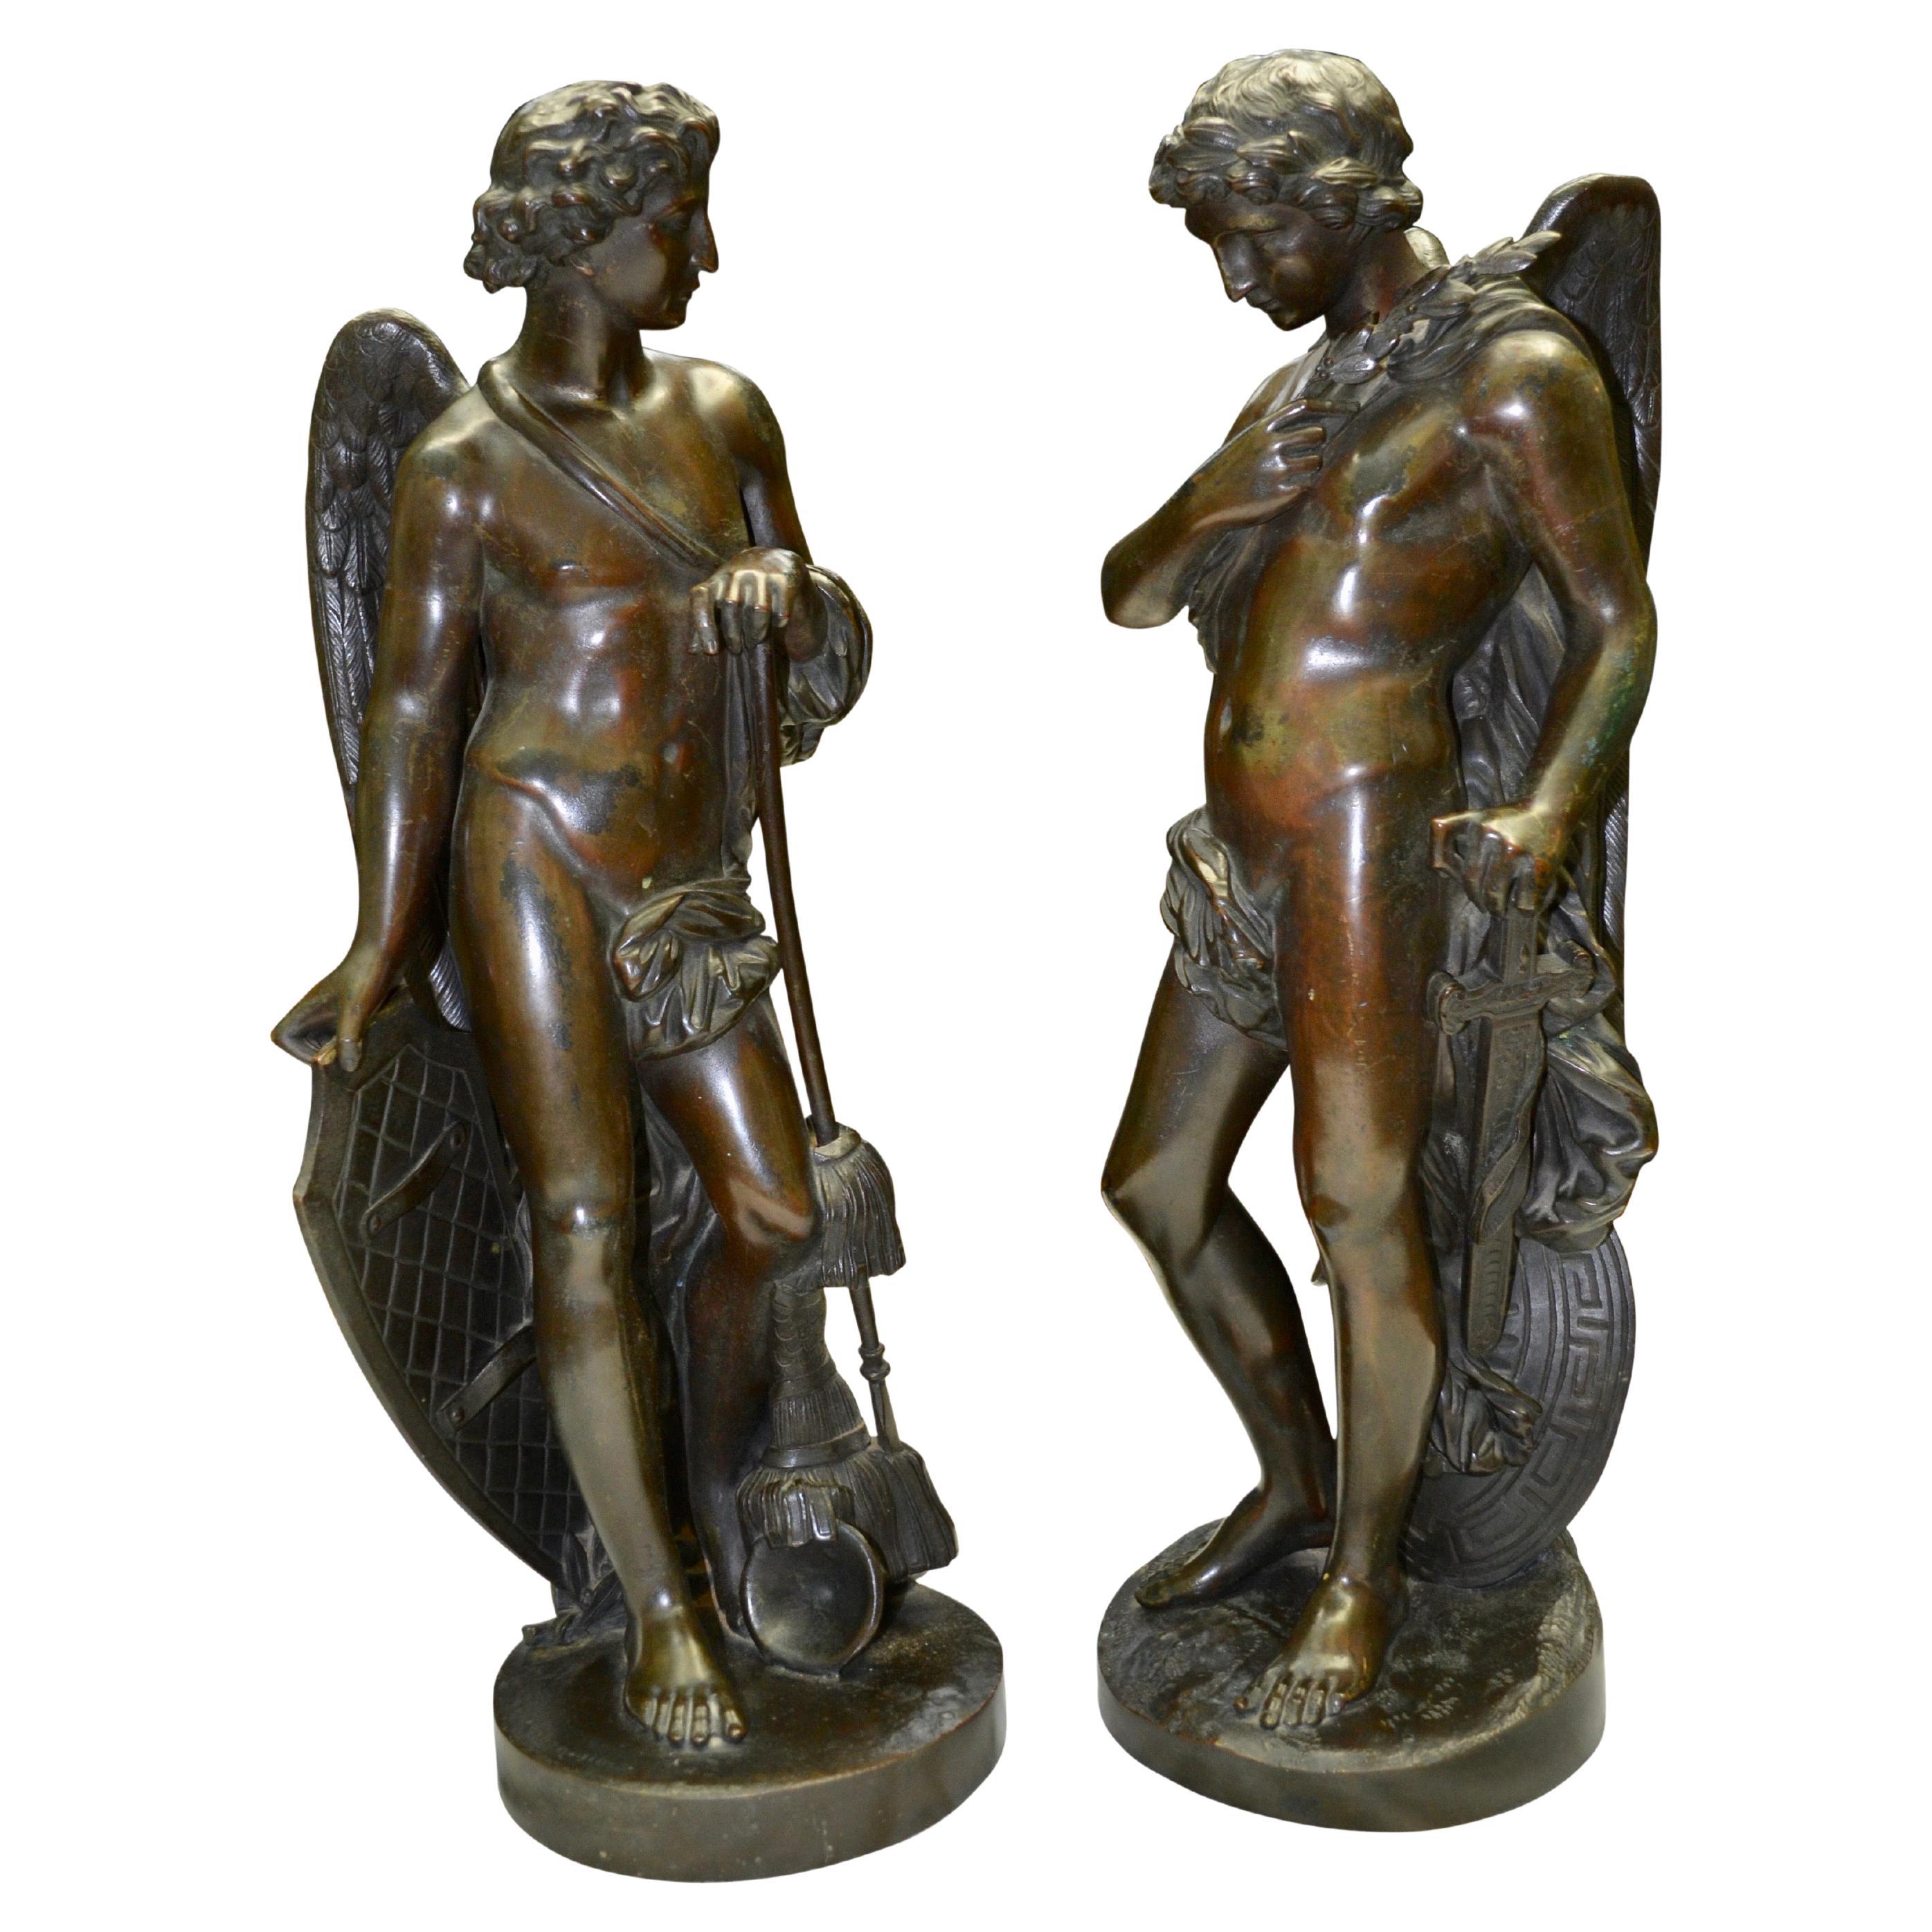 A complimentary pair of beautifully cast and rare standing Greco-Roman patinated bronze statues of winged mostly nude but partly classically draped male figures that are surprisingly unsigned. 

One of the figures is looking down and is holding a